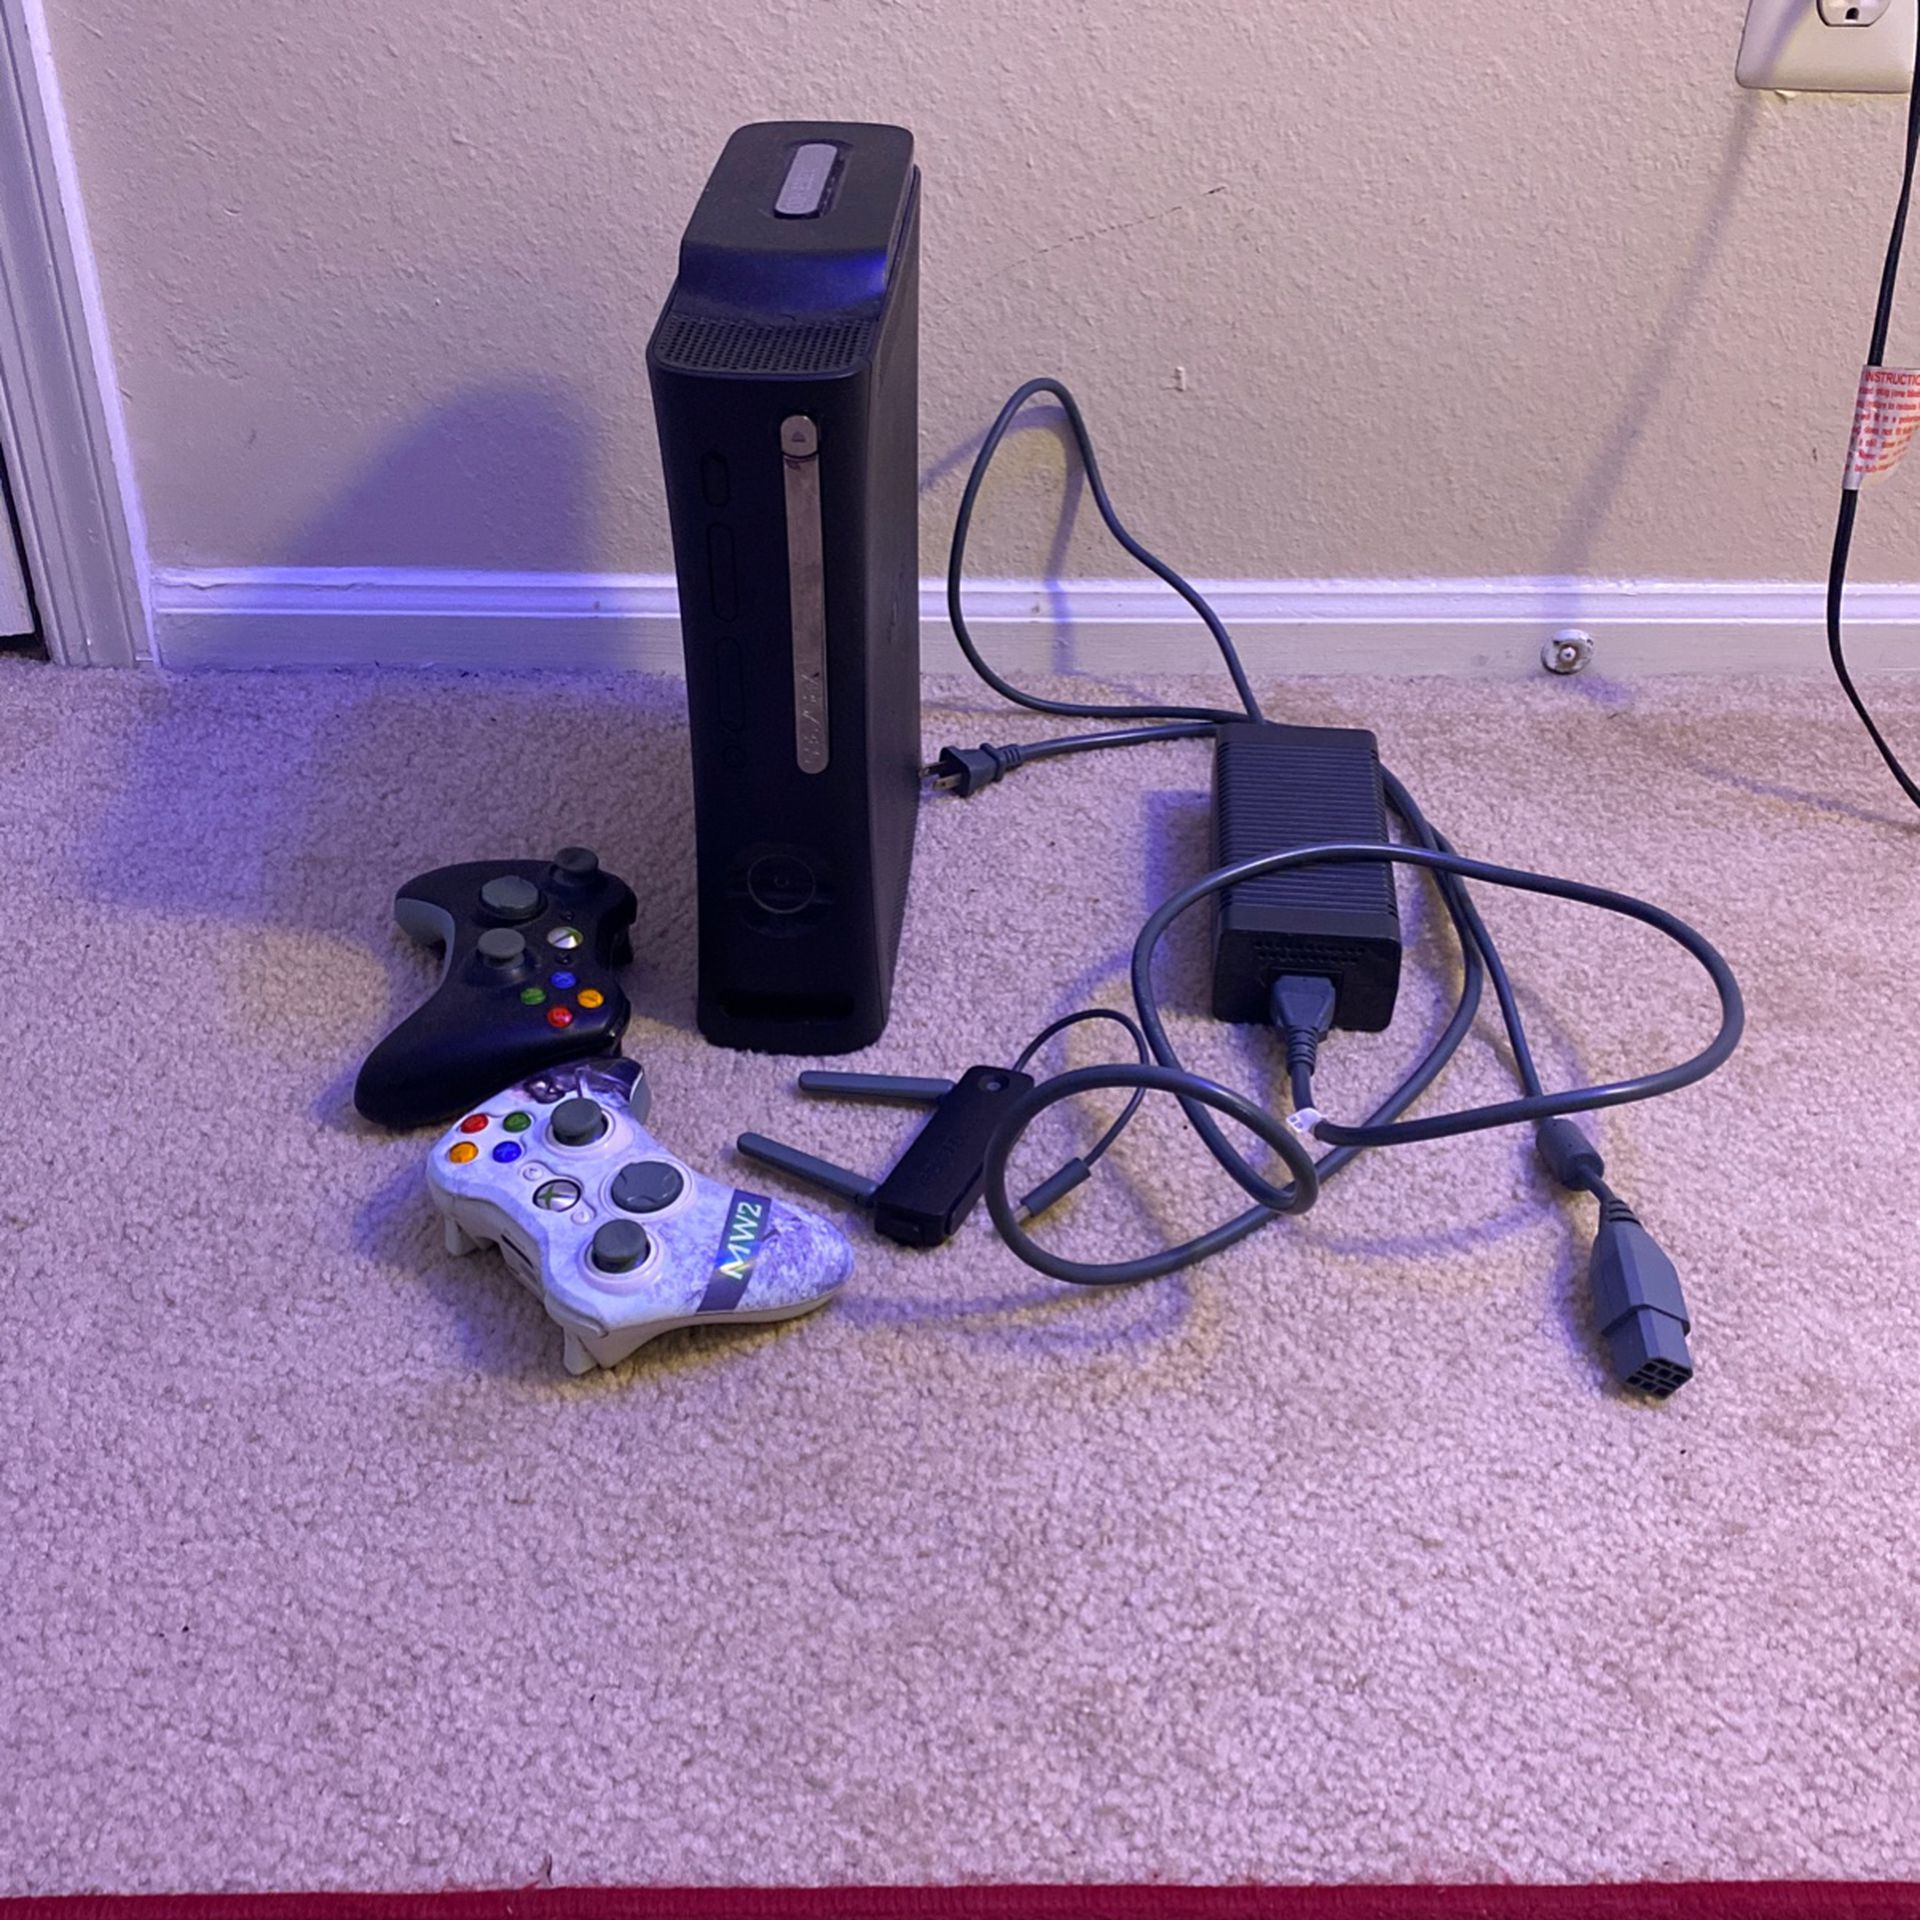 Xbox 360 + Charger + 2 Controllers + Network Adapter